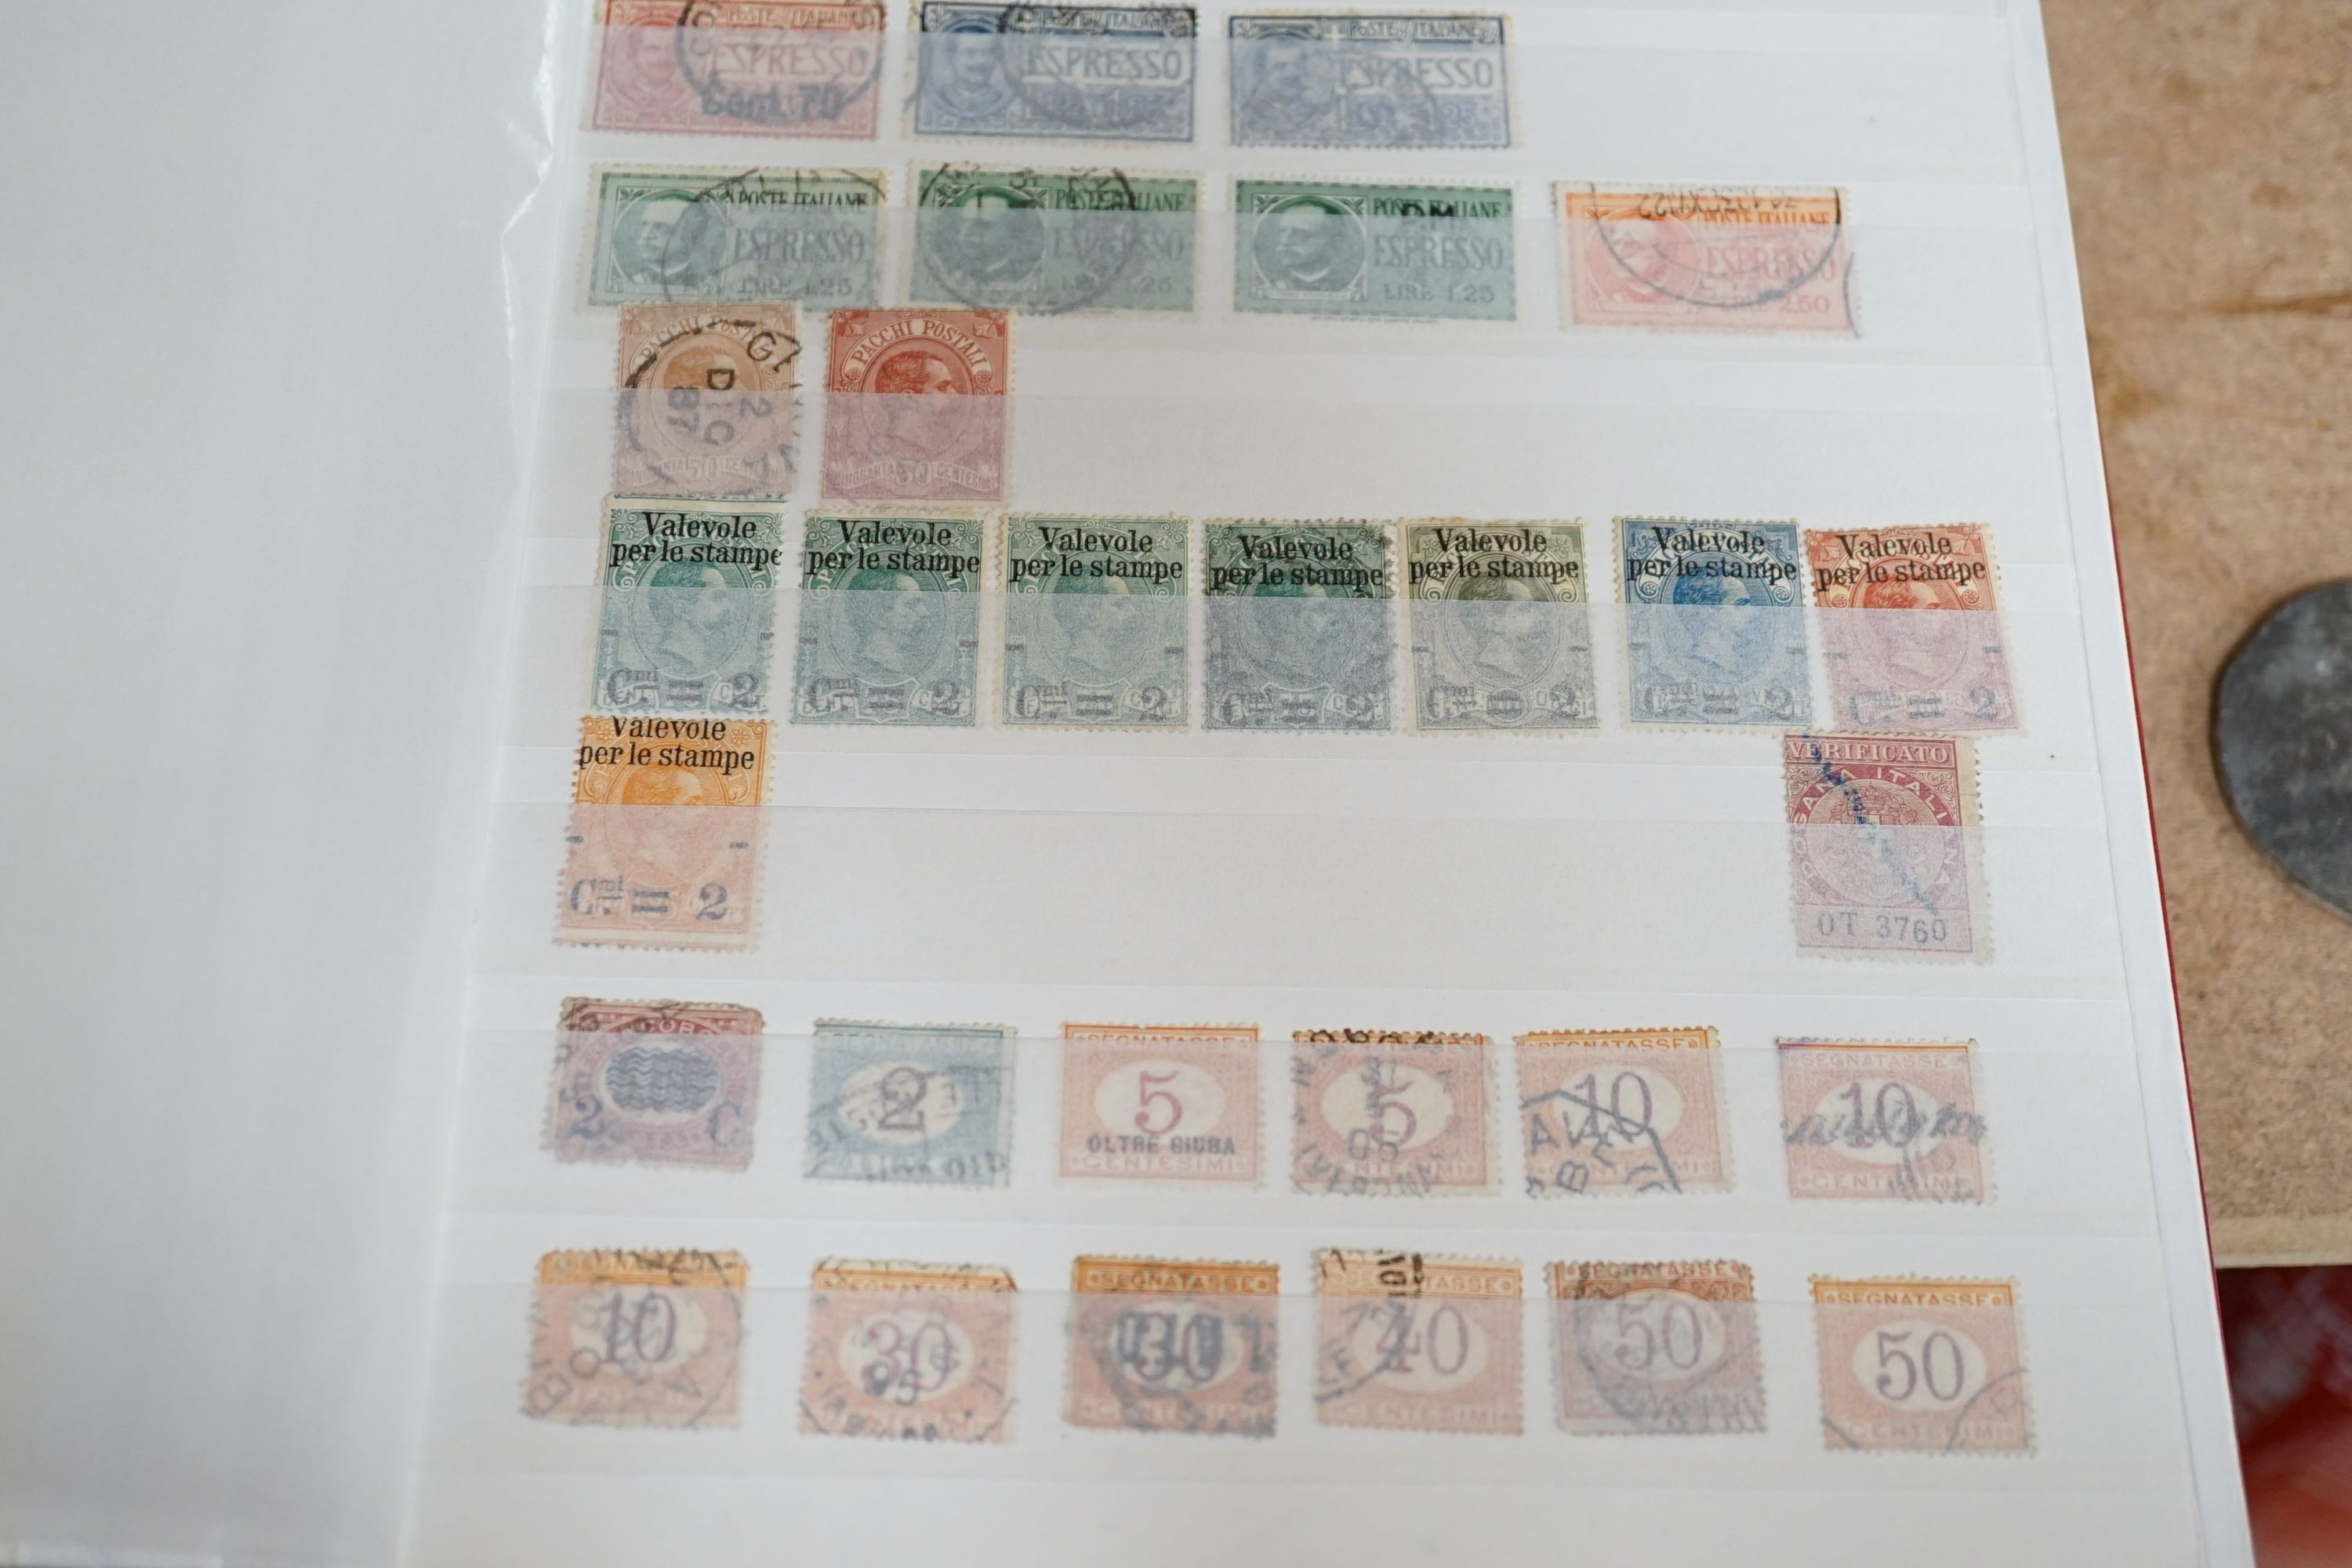 Italy stamps in album and stock book with Italian states including Parma 1859 20c. blue unused with certificate, Romana 1859 4b. and 6b. mint with certificates. Sicily 1859 half Gr. - 50Gr. mixed mint and used, Italy 186